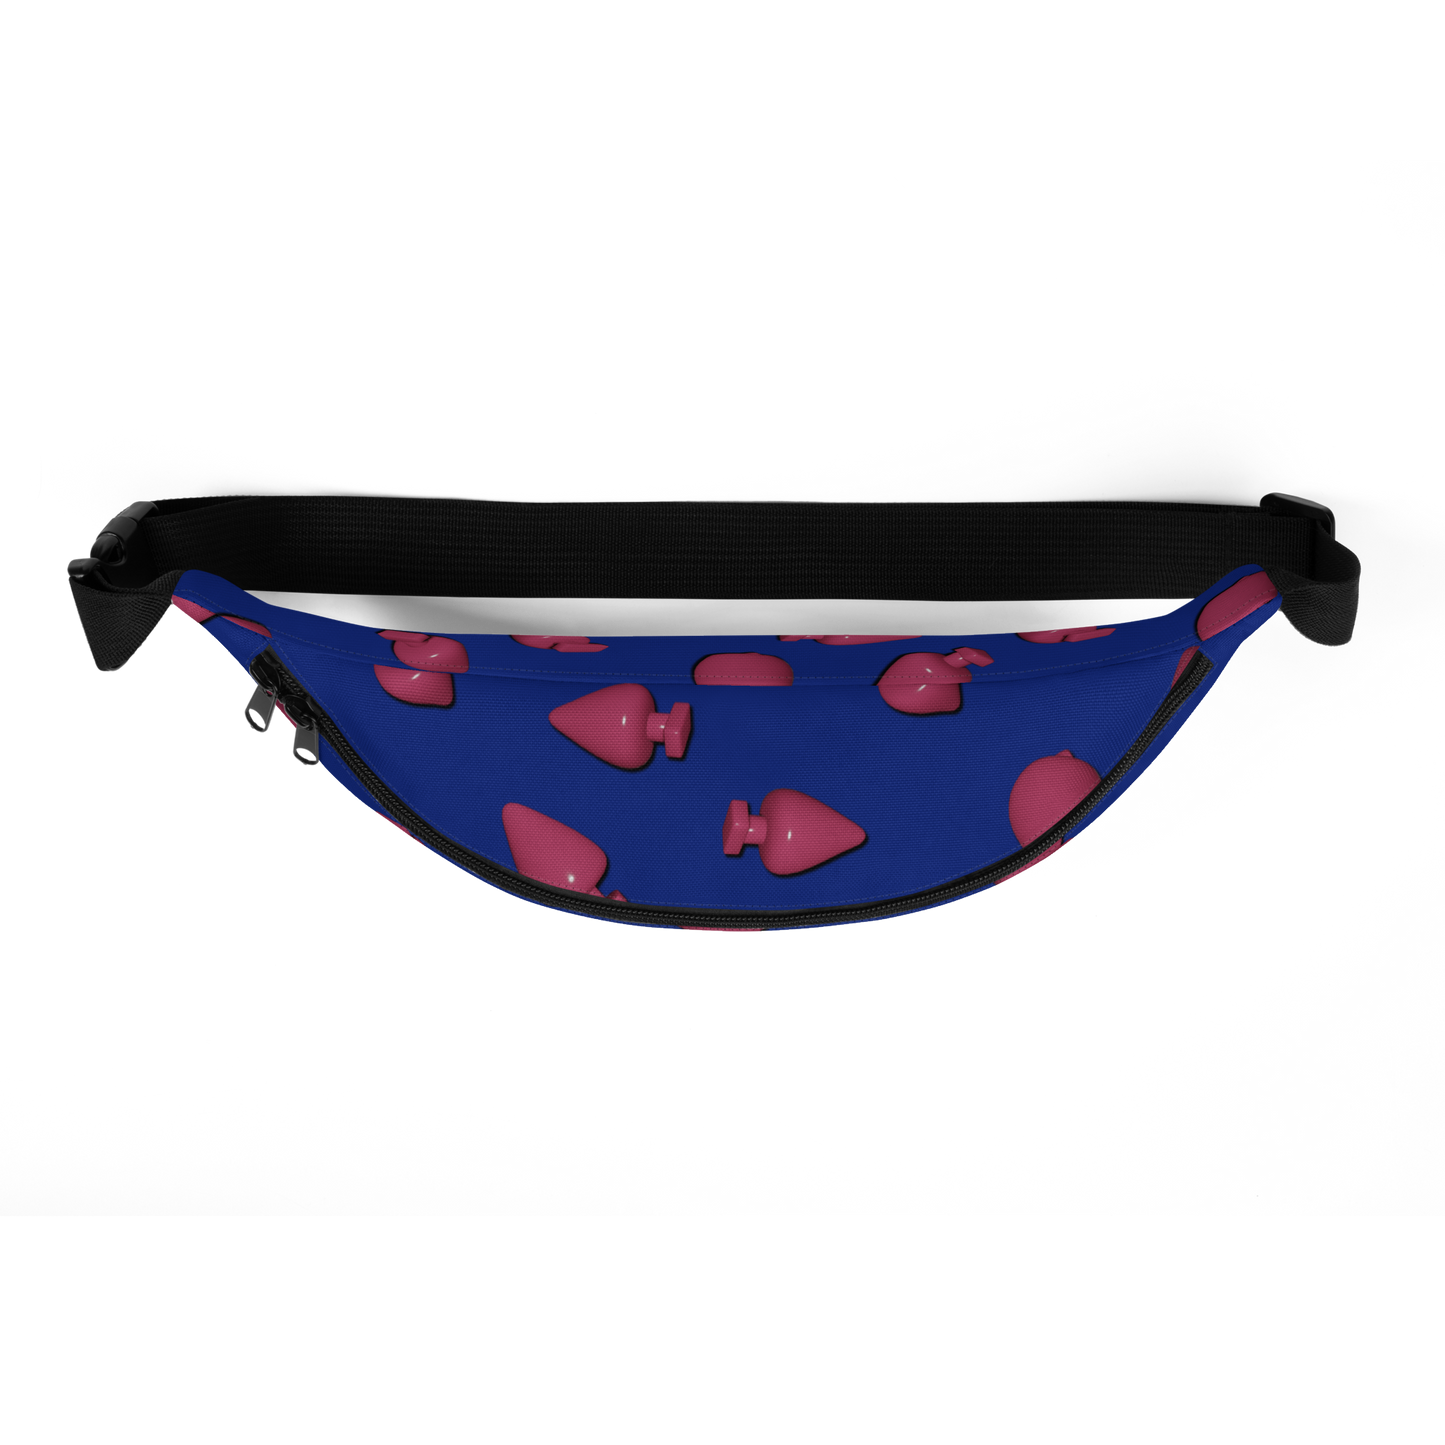 BUTTPLUG FANNY PACK